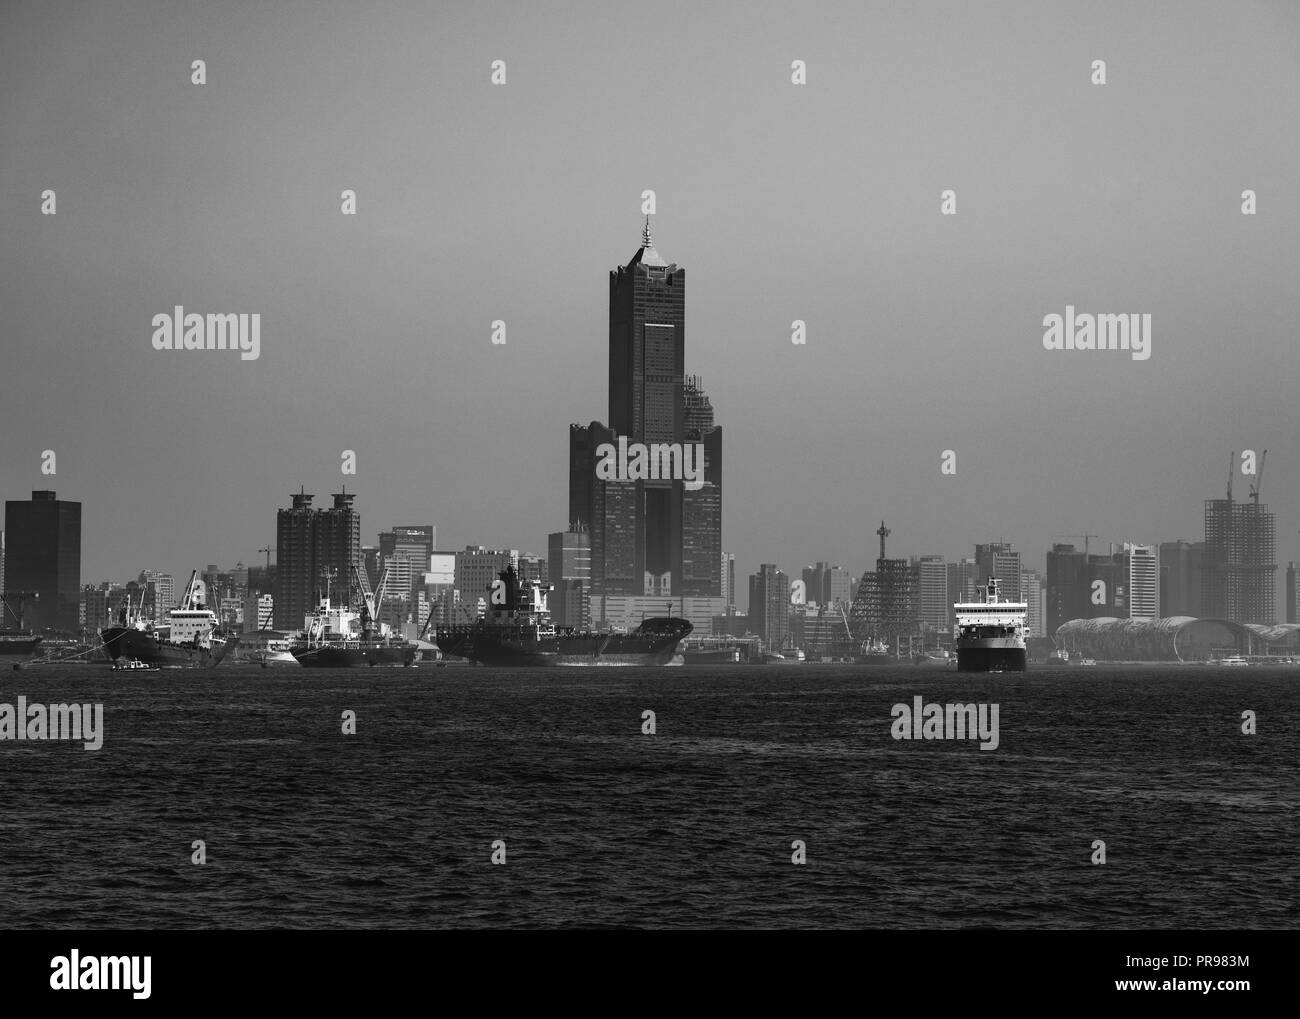 Black and white view of Kaohsiung port and skyline in background Stock Photo